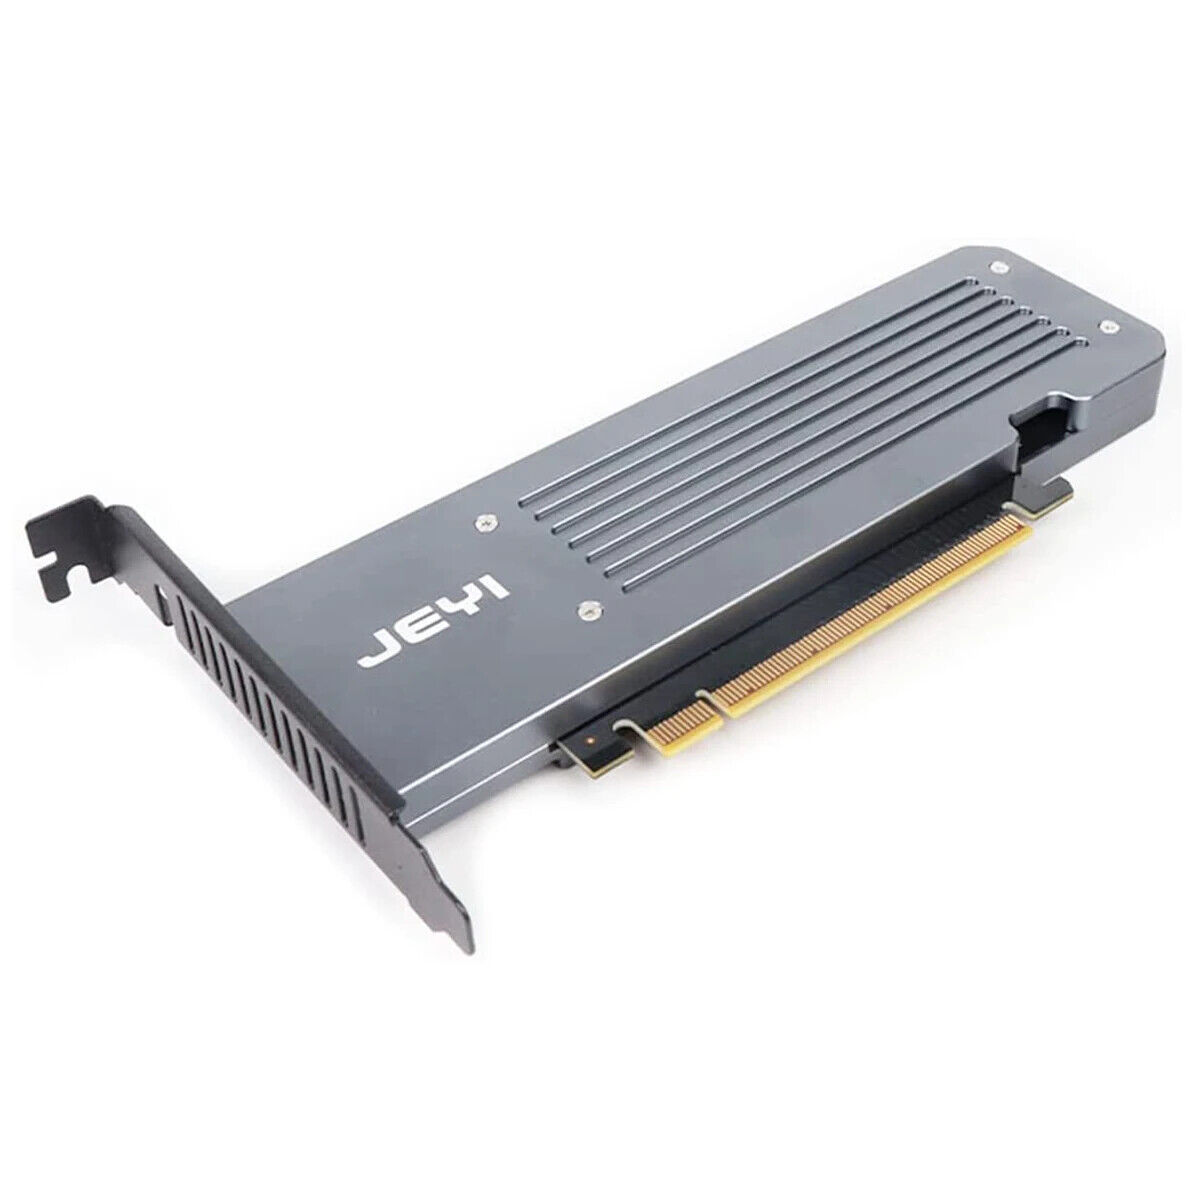 JEYI 4 SSD M.2 X16 PCIe 4.0 X4 Expansion Card with Heatsink,2280 256Gbps